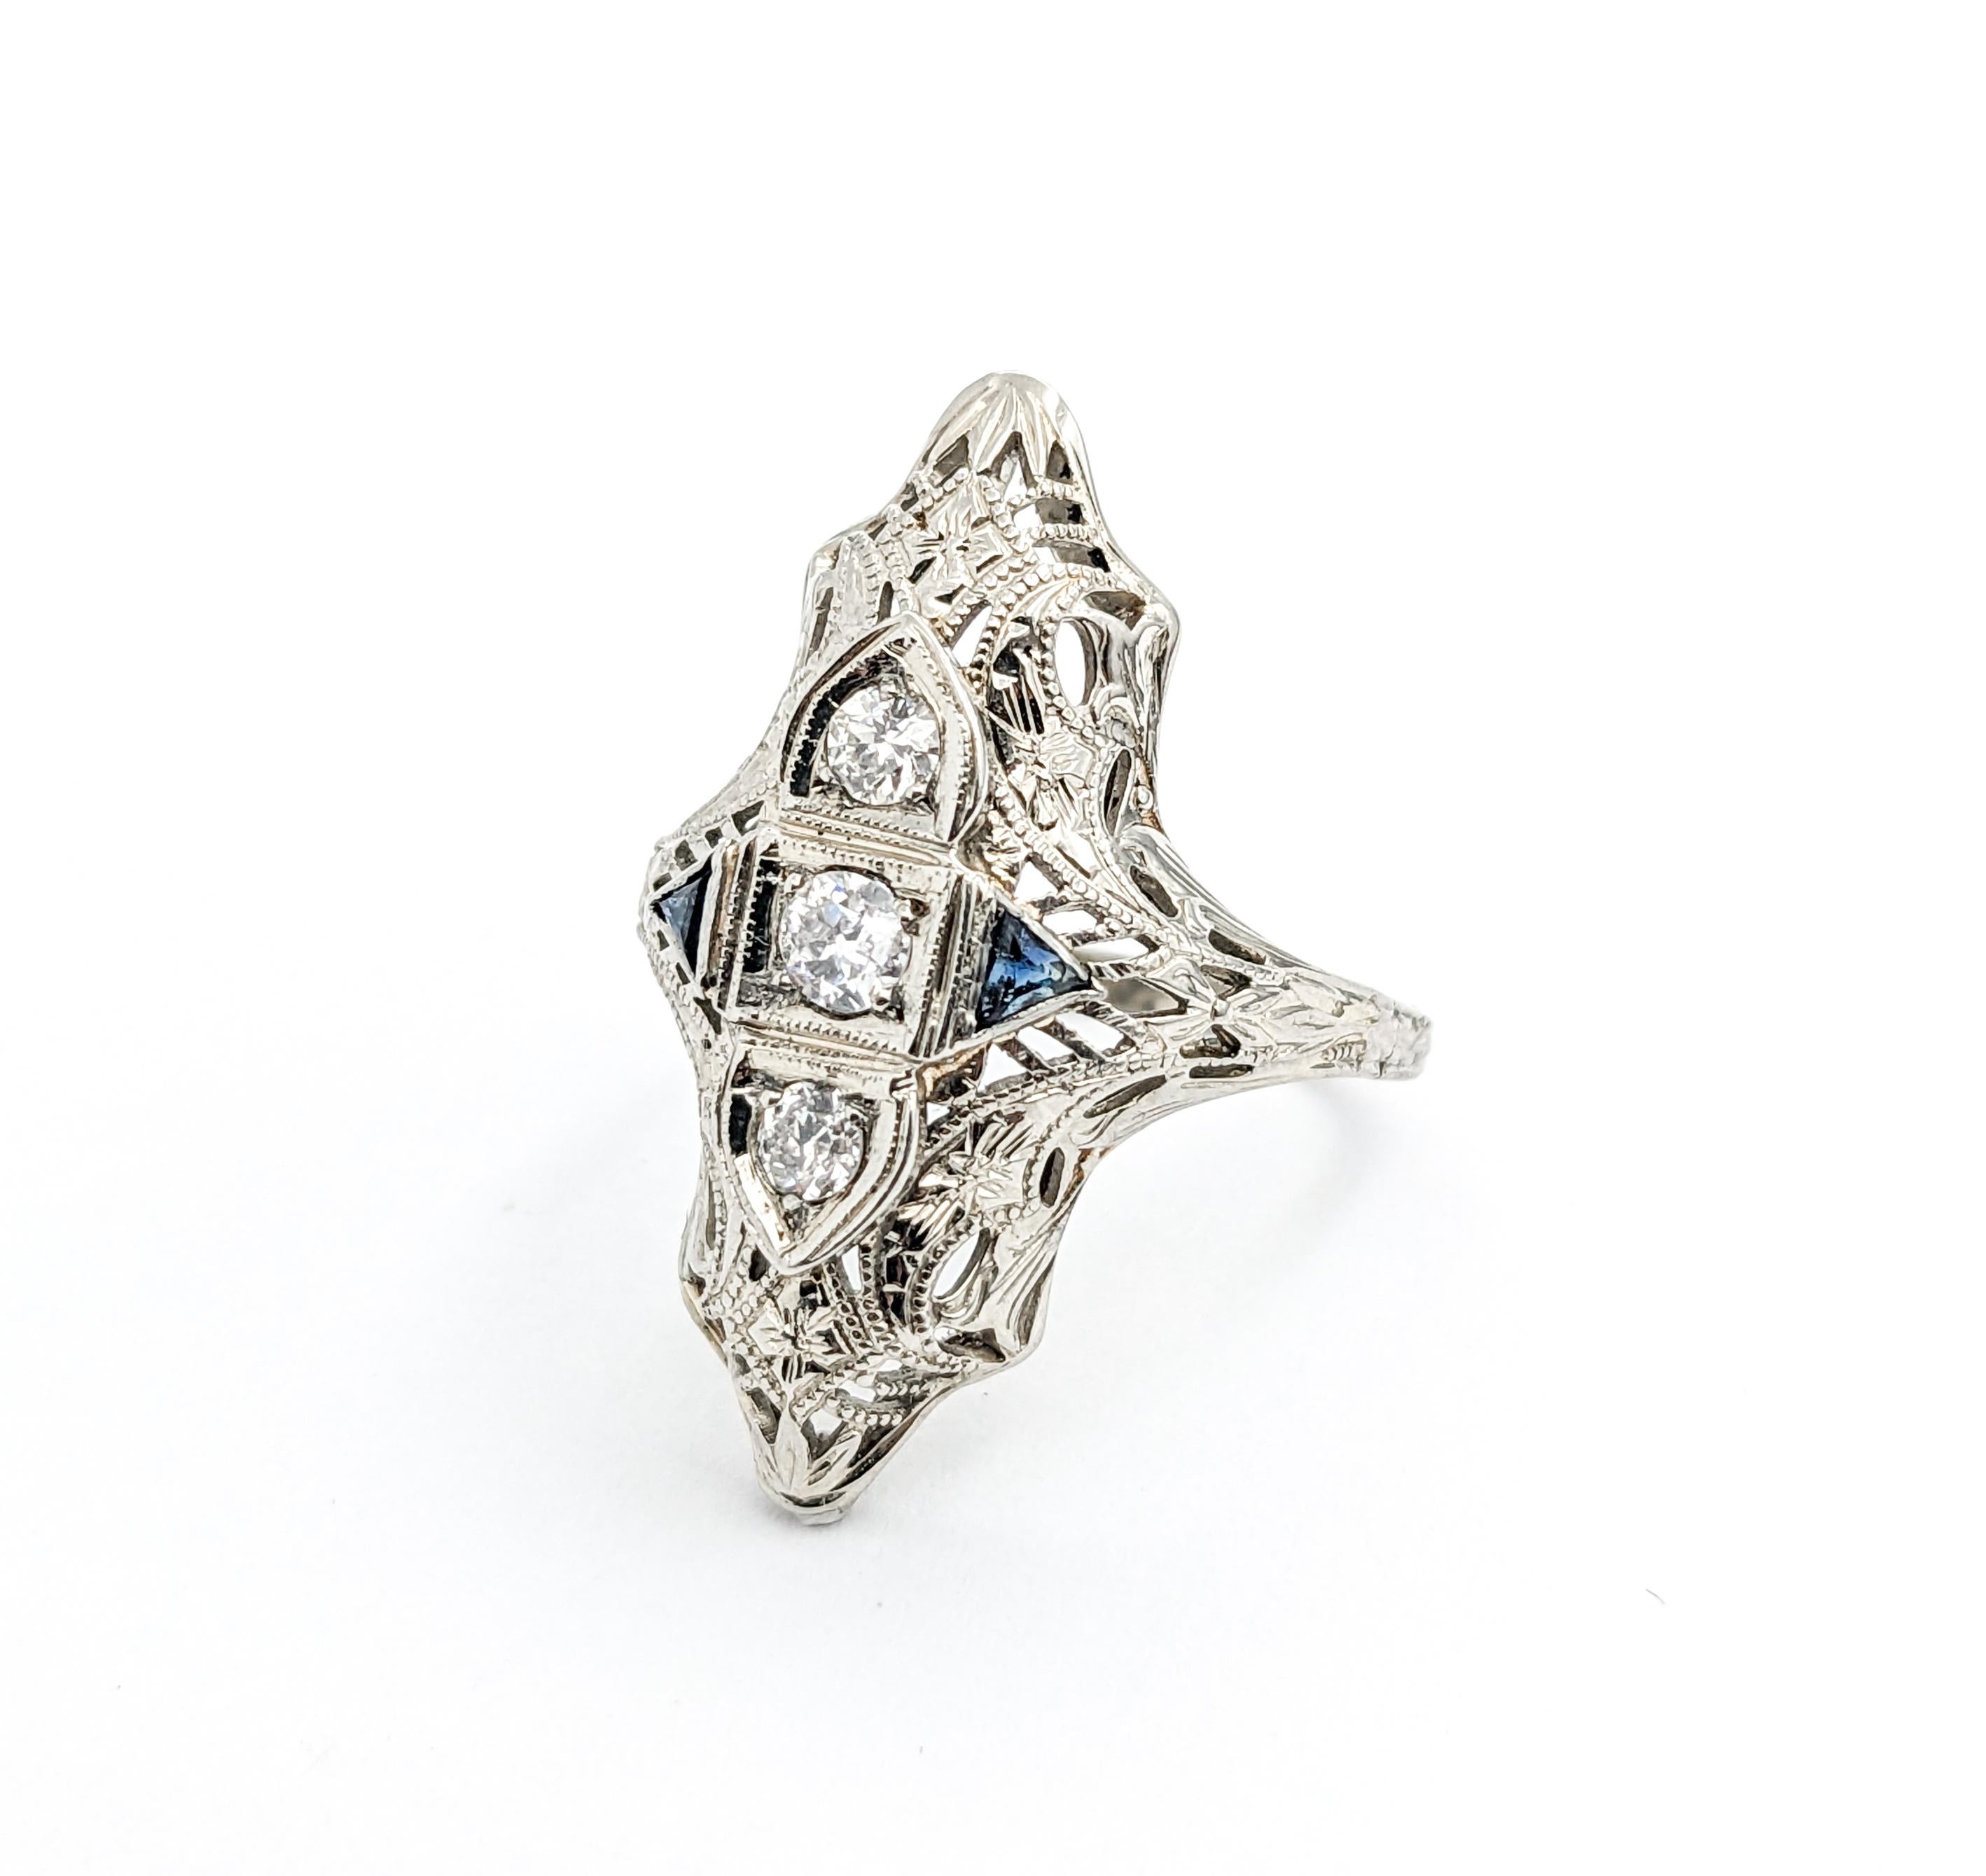 Art Deco era Diamond & Sapphire Ring In White Gold

Presenting a magnificent Antique Ring, exquisitely crafted in 18k white gold. This ring is an embodiment of the elegance and sophisticated design that is characteristic of the Art Deco period. The